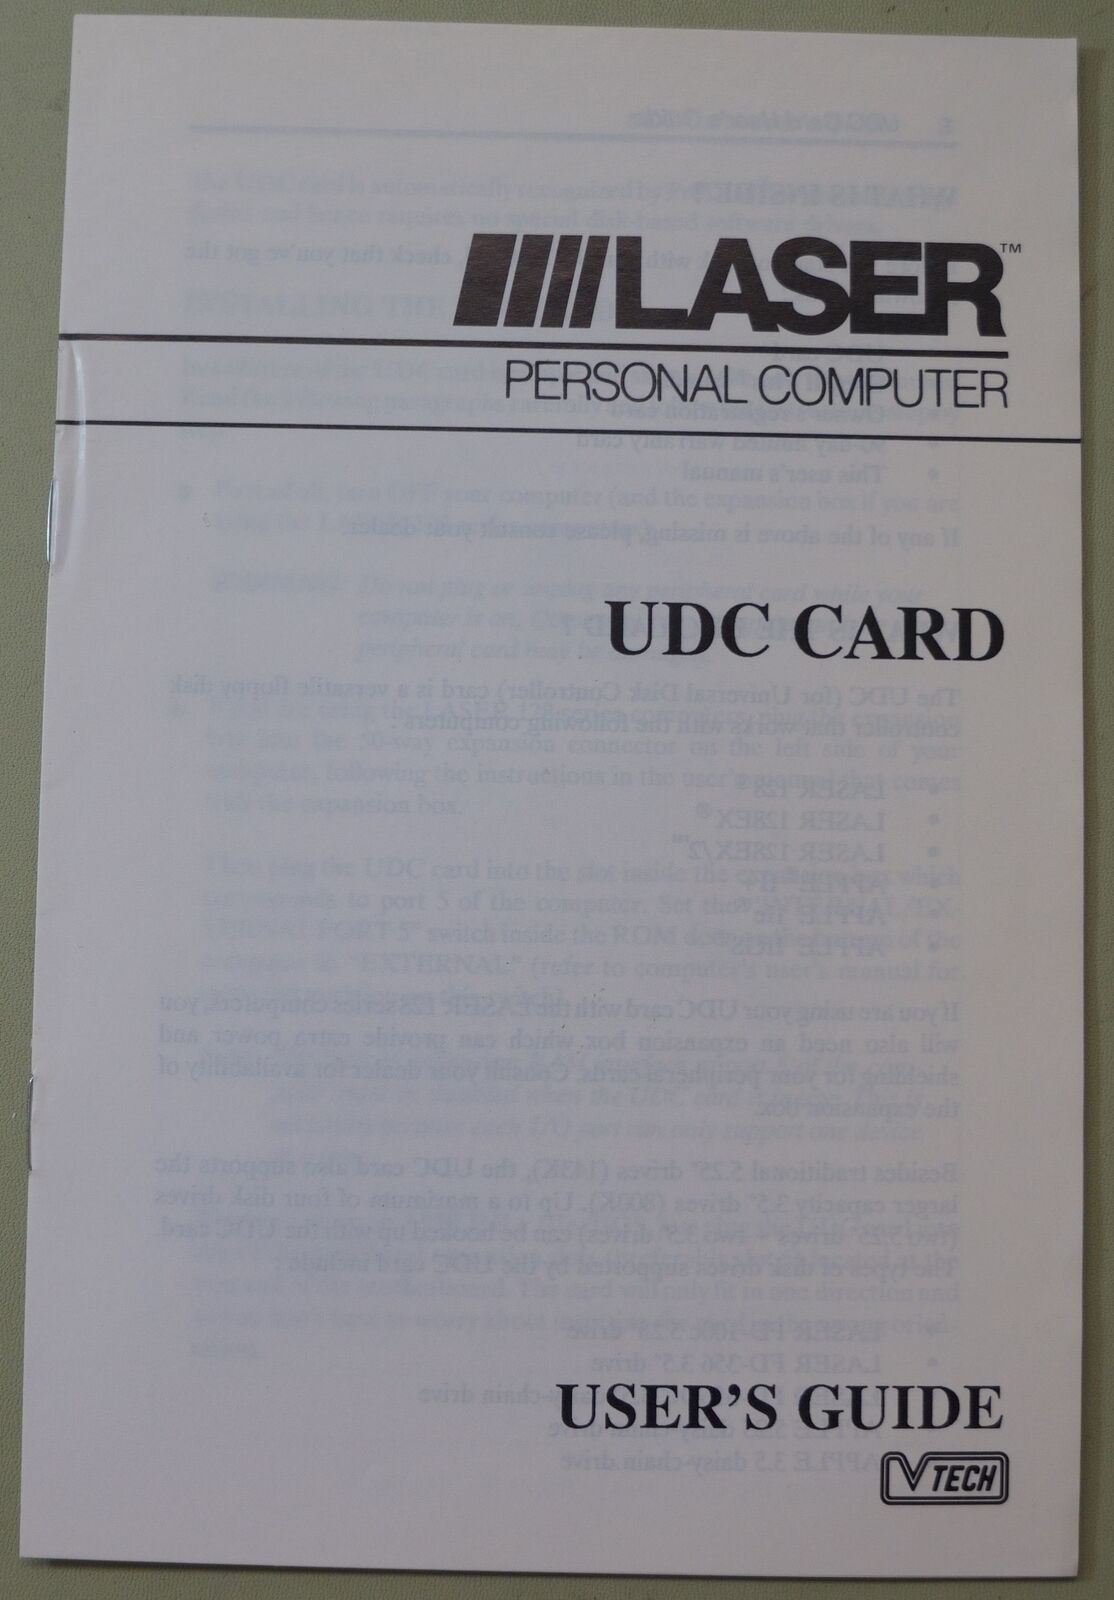 Laser Personal Computer UDC Card for Laser 128 or Apple II Plus - User\'s Guide 